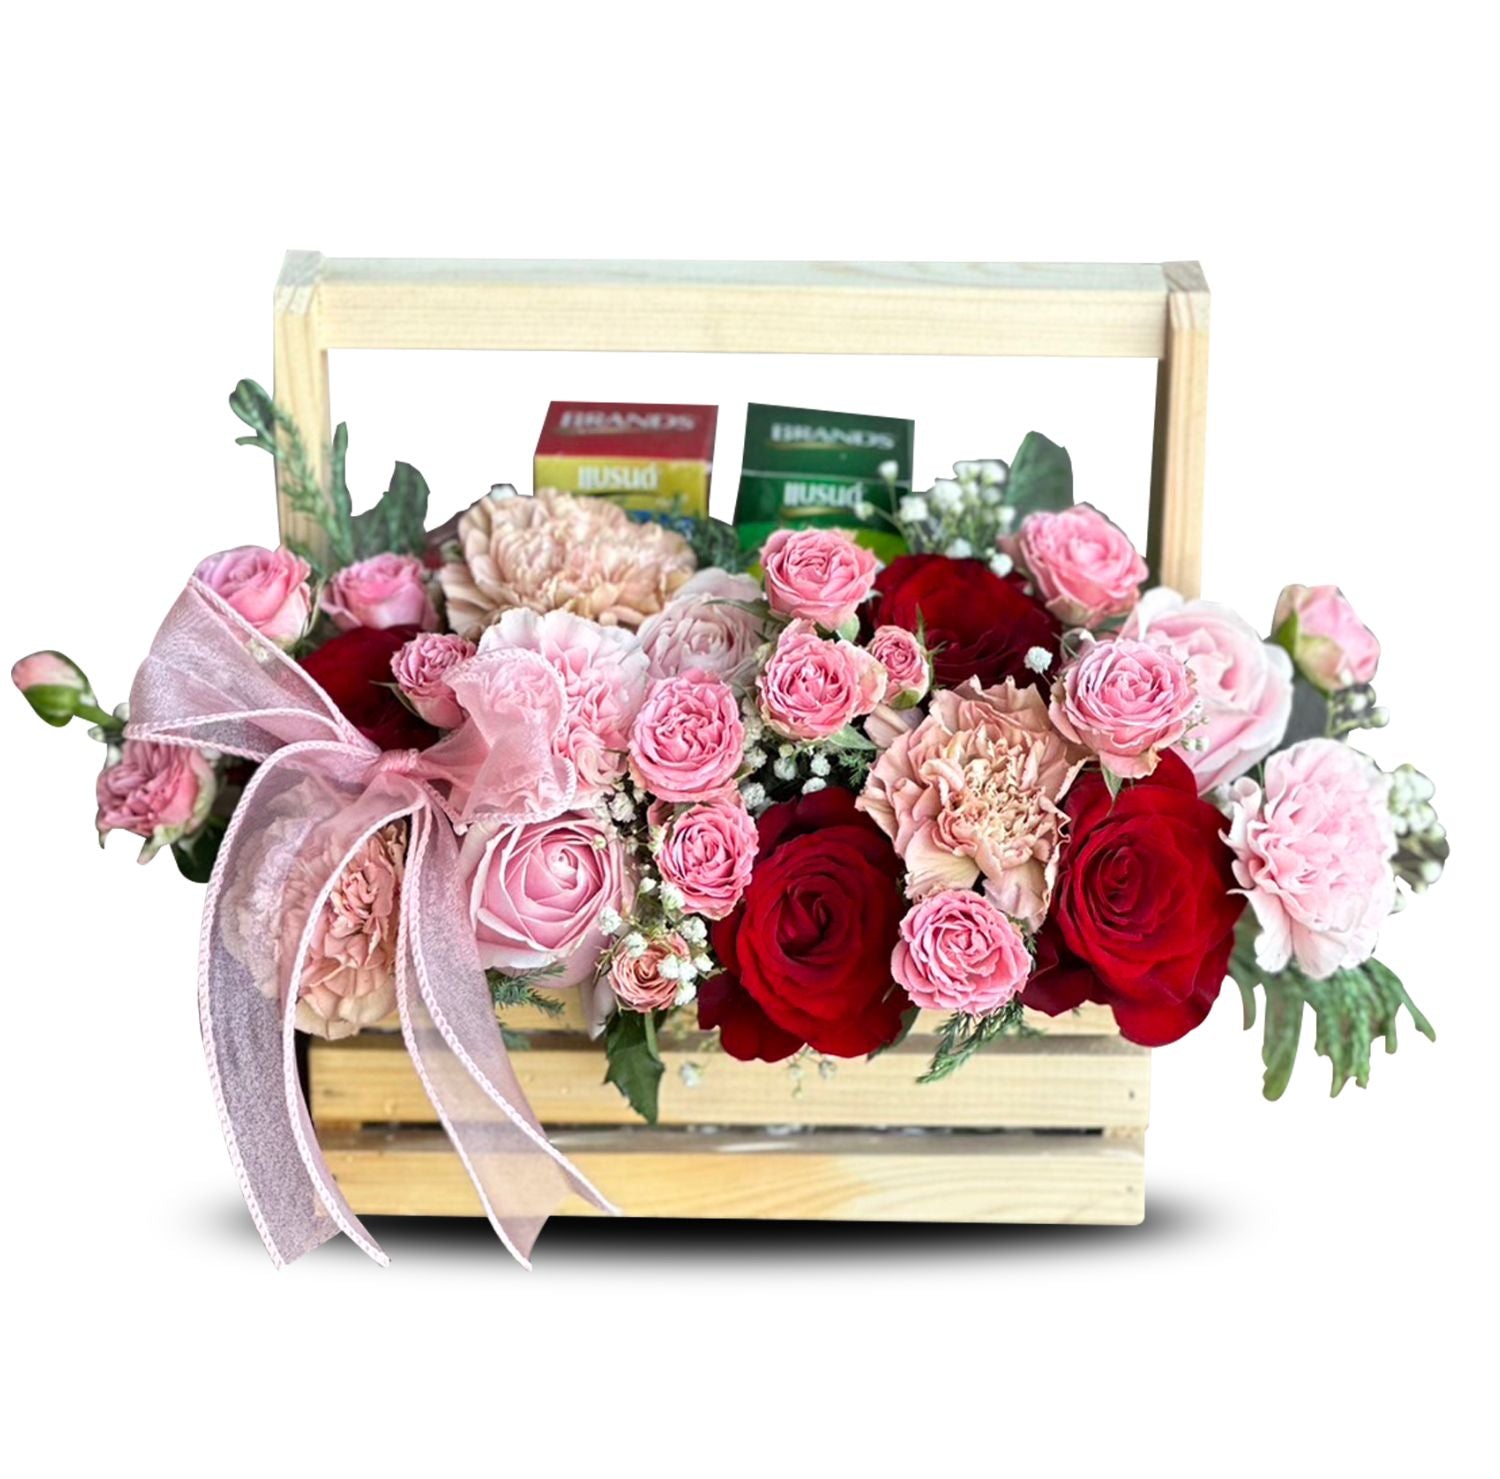 "Love & Caring" Basket Of Flowers with Bird-Nest and Chicken Essence